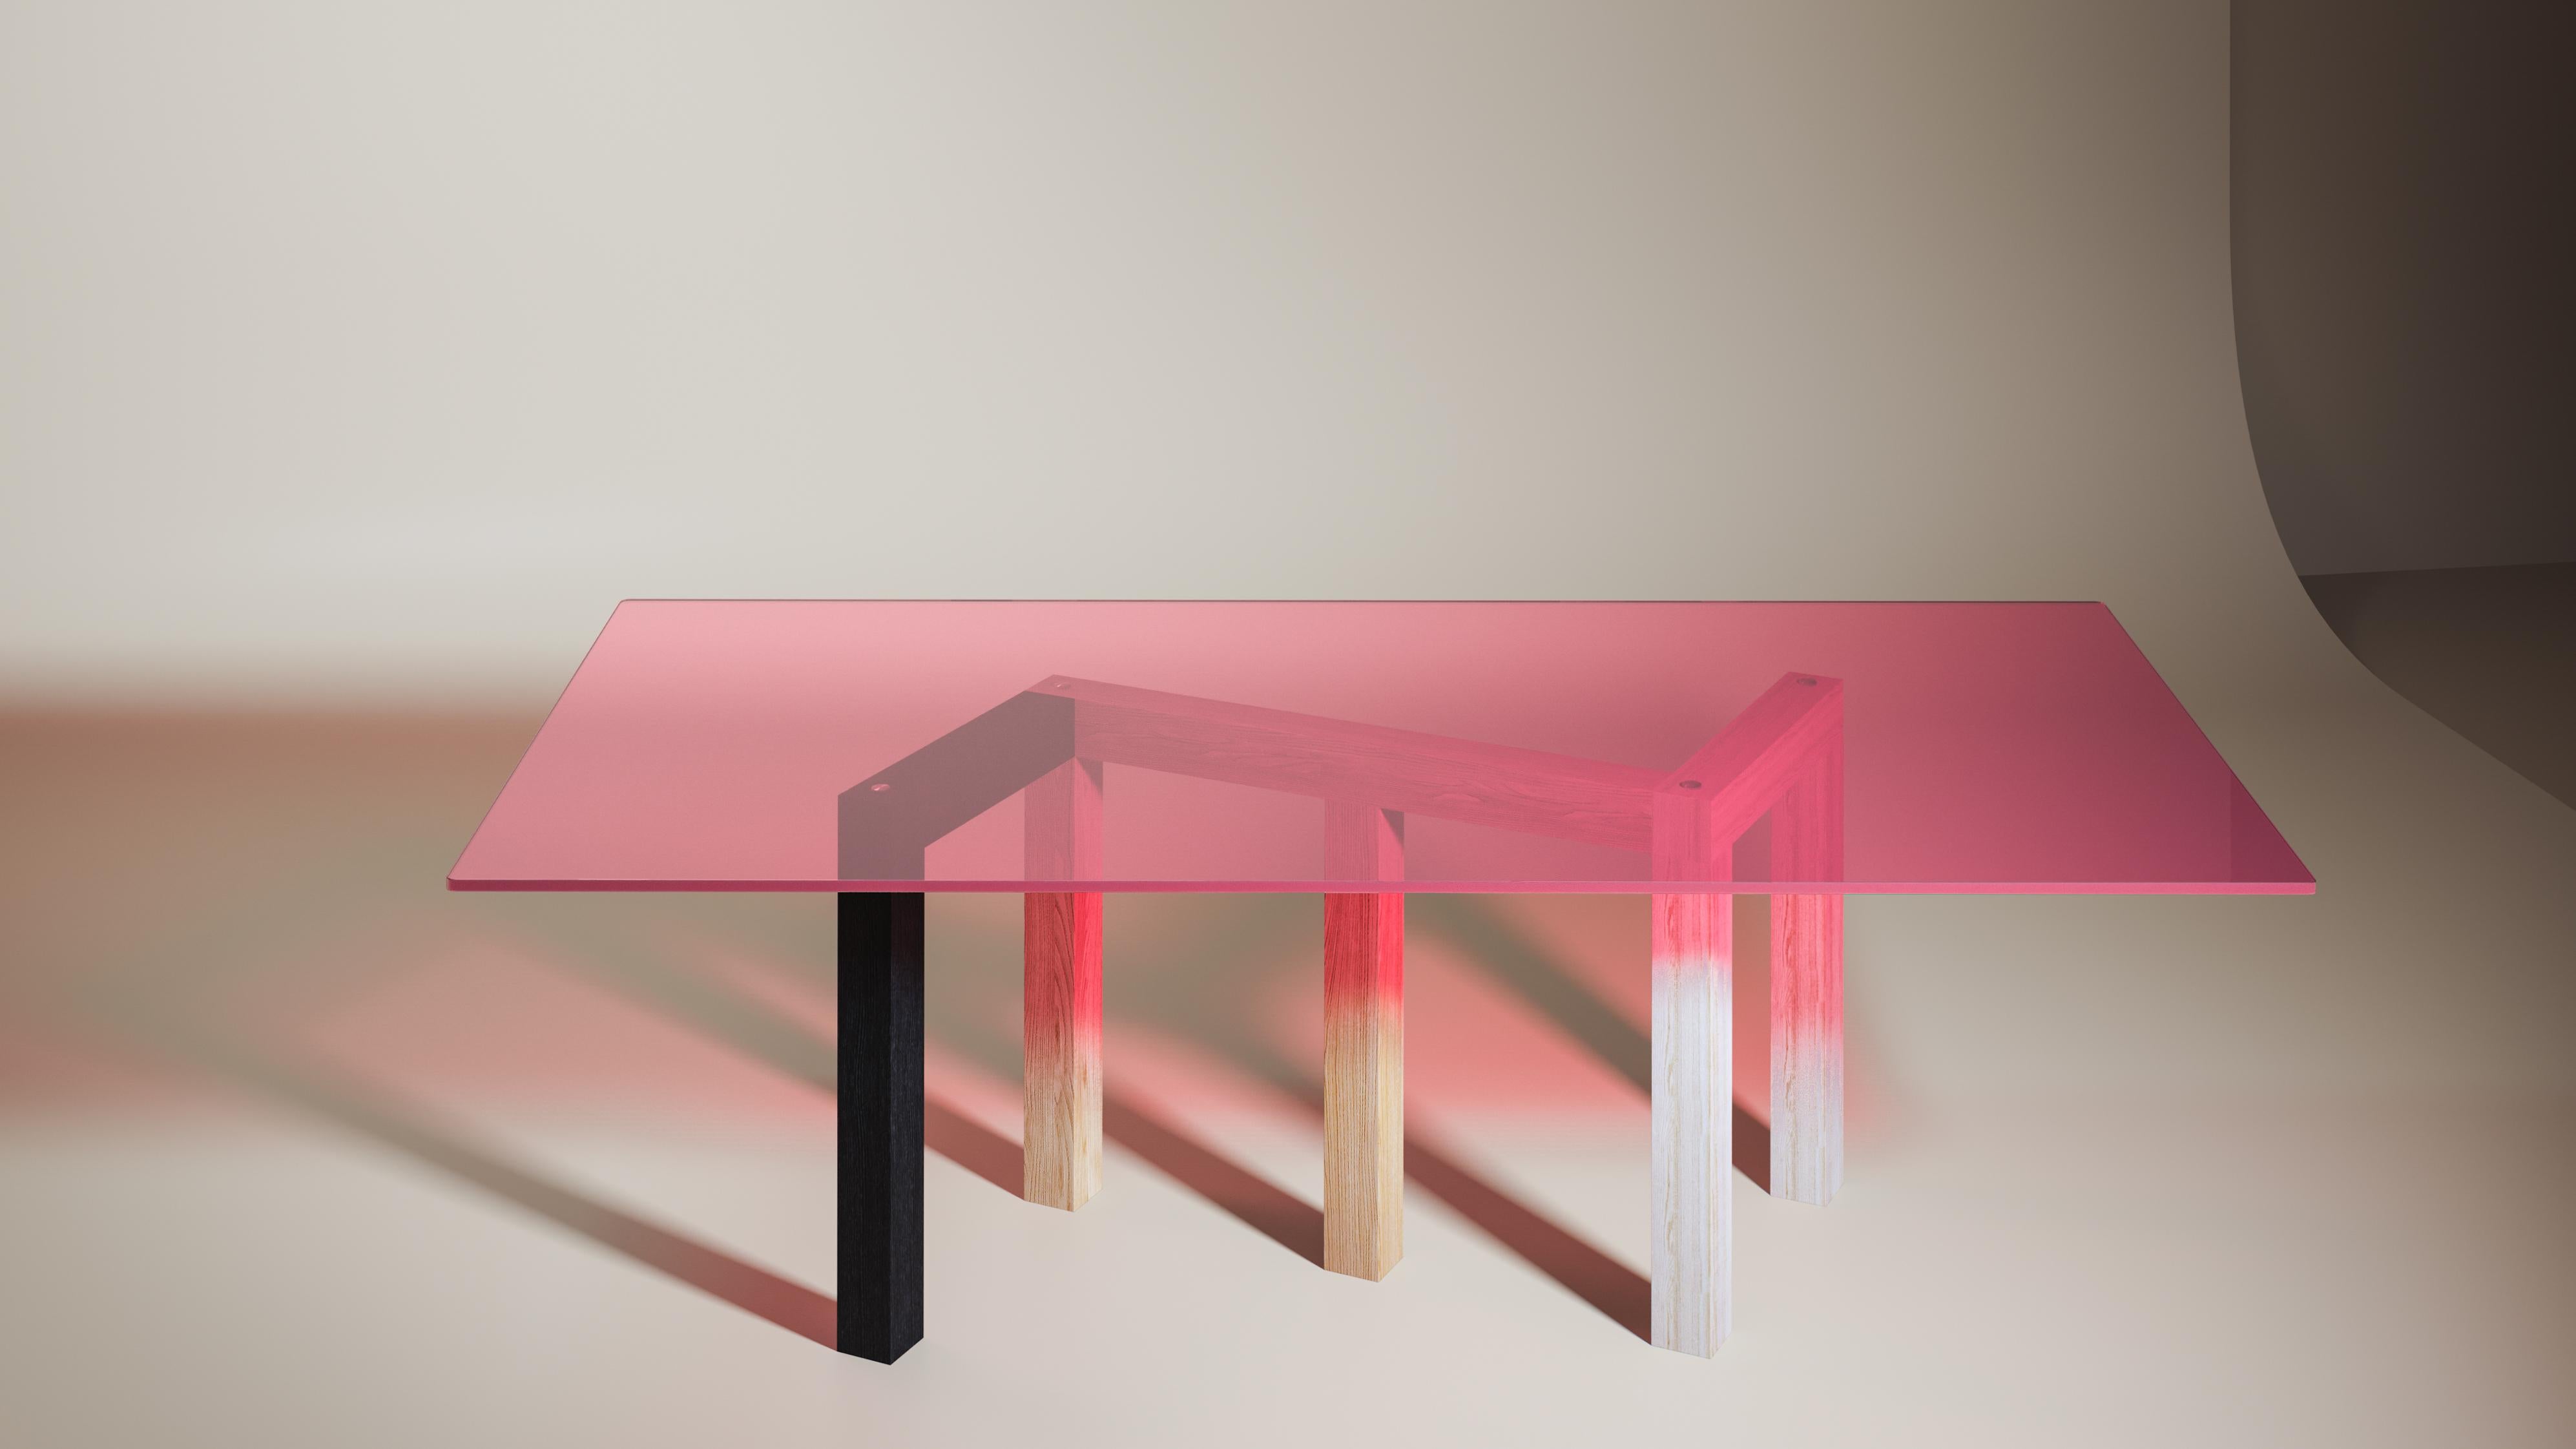 Penrose dining table by Hayo Gebauer
Dimensions: D 115 x W 240 x H 71 cm
Materials: Black, Bleeched oiled solid ash, pink glass top

Penrose is a large dinner table in wood and glass created by Berlin based designer Hayo Gebauer. The design was